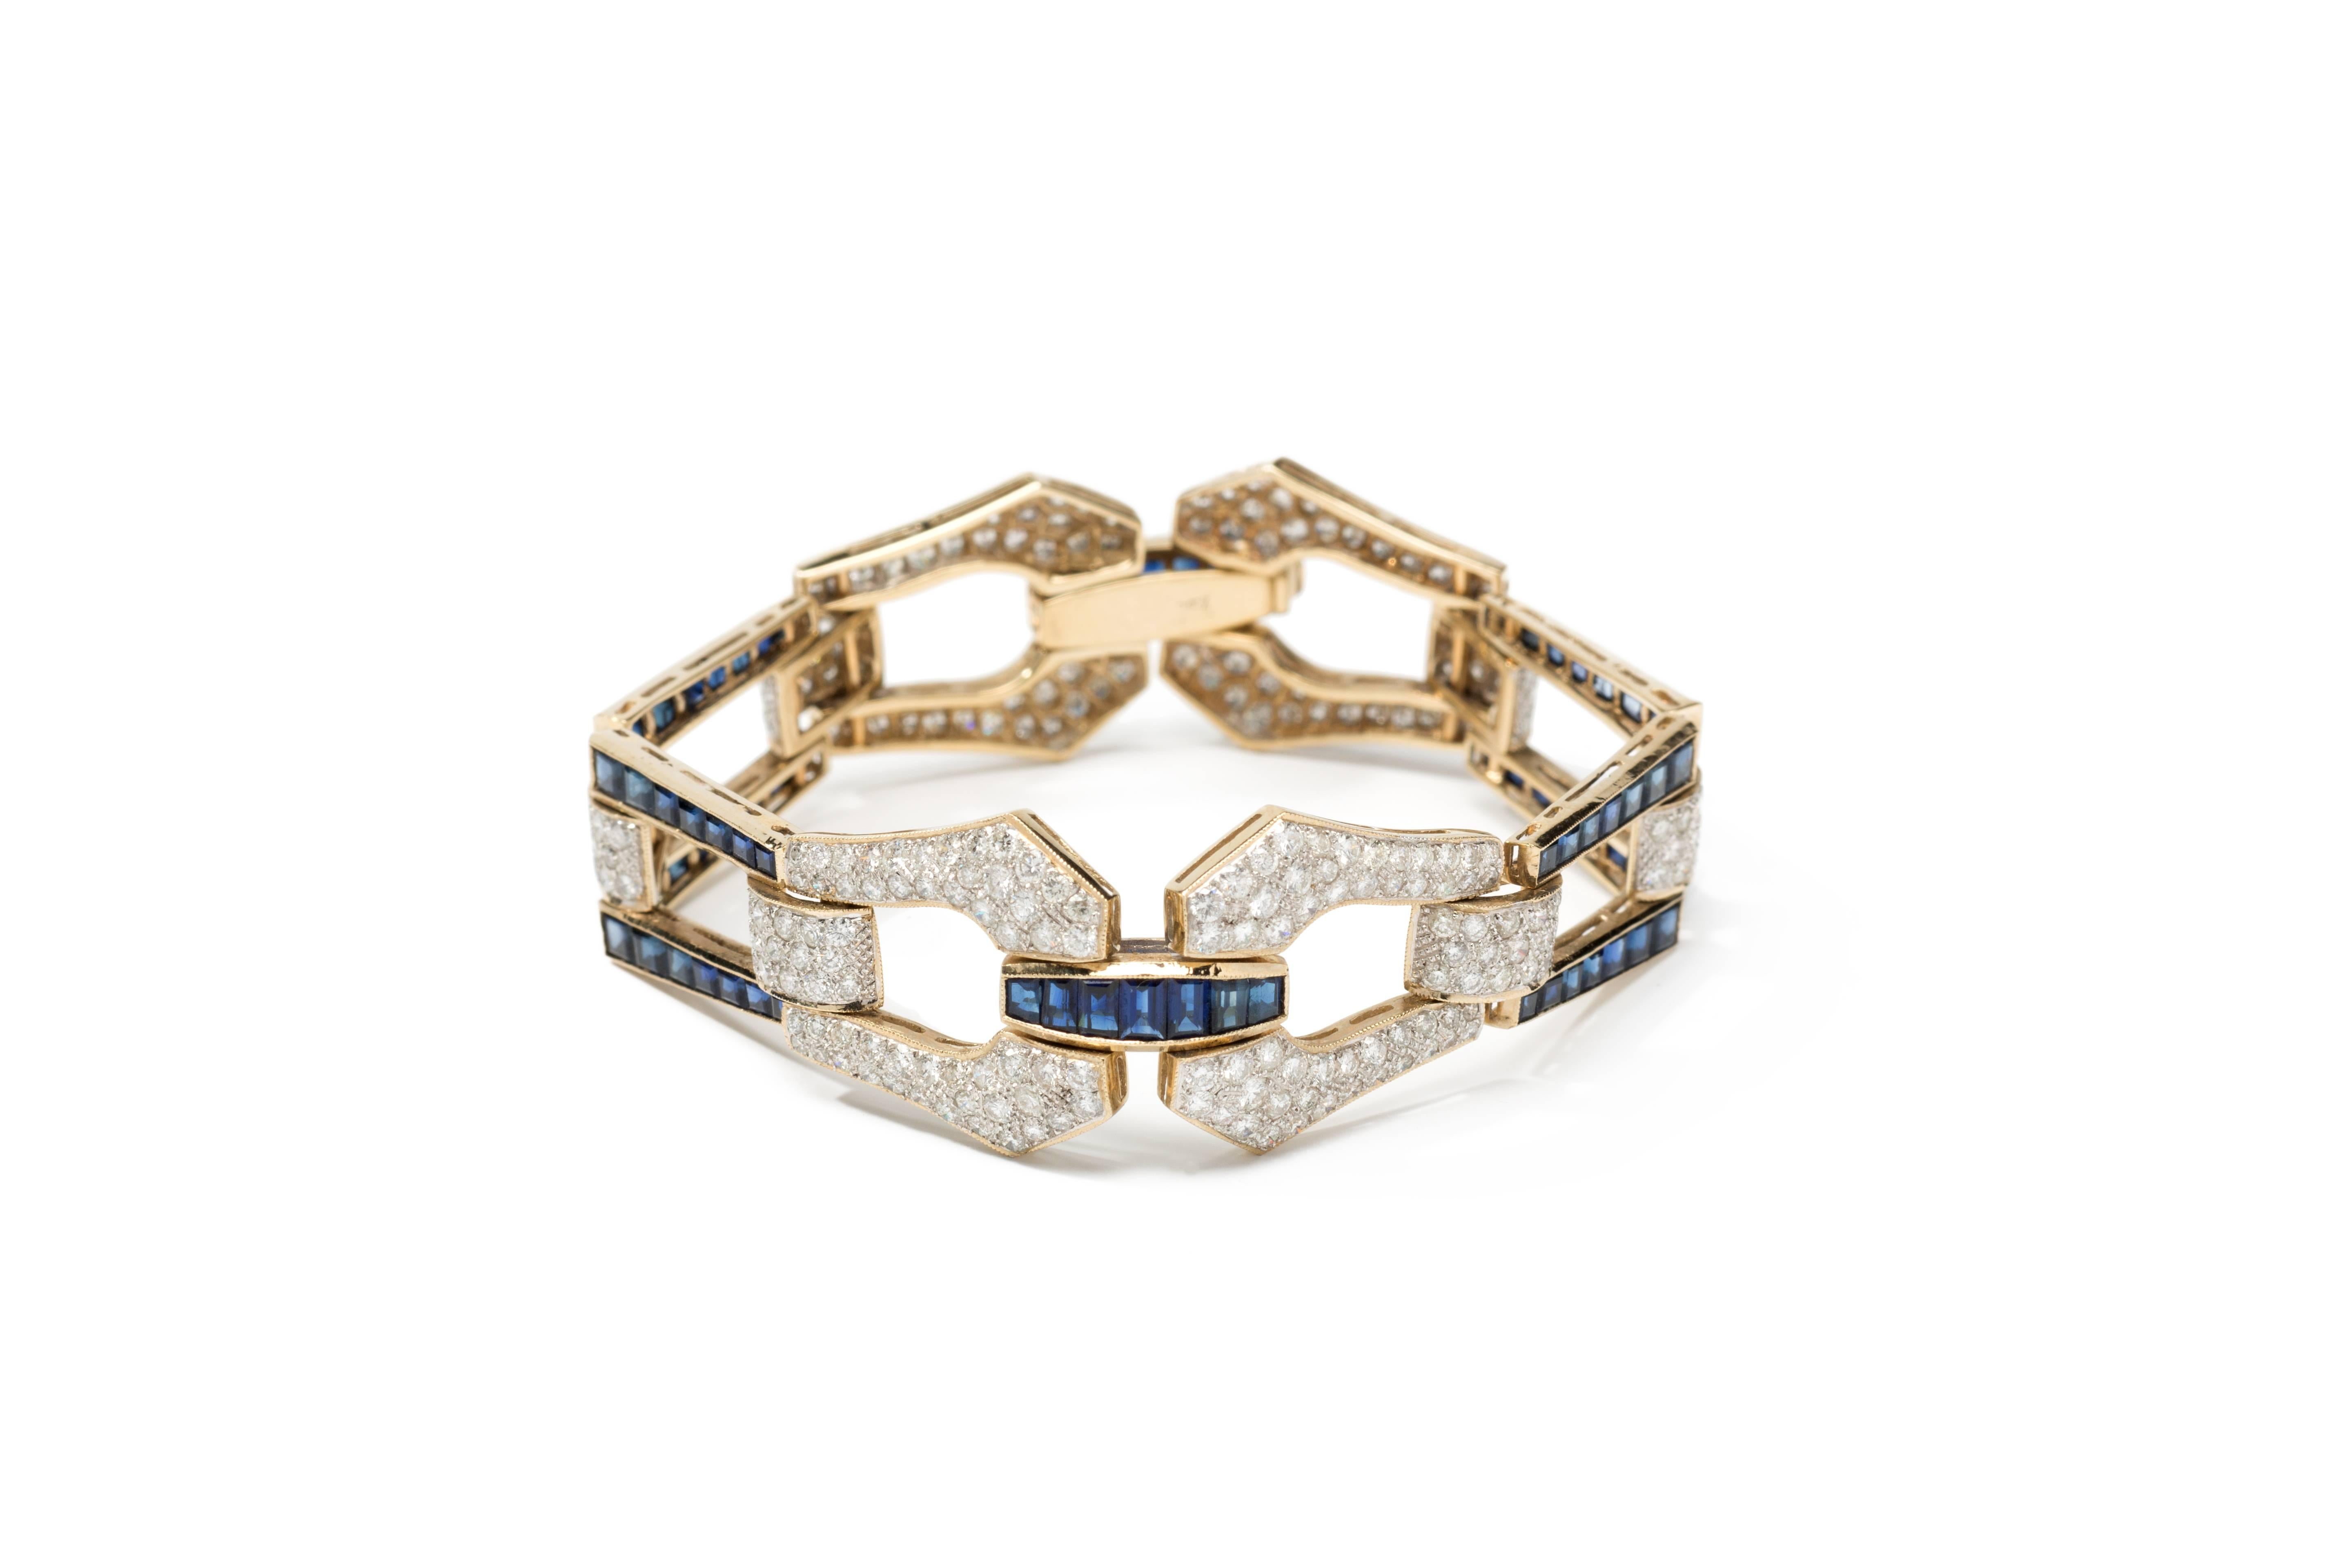 Art Deco Style design. Ten rows of 70 carré-cut sapphire weighing circa 11,0 ct. 310 brilliant-cut pavé set diamonds weighing ca. 5,45 ct. Mounted in 18 K yellow- and white gold. Marked with the purity 750 on the clasp. 
Total weight: 22,30 g.